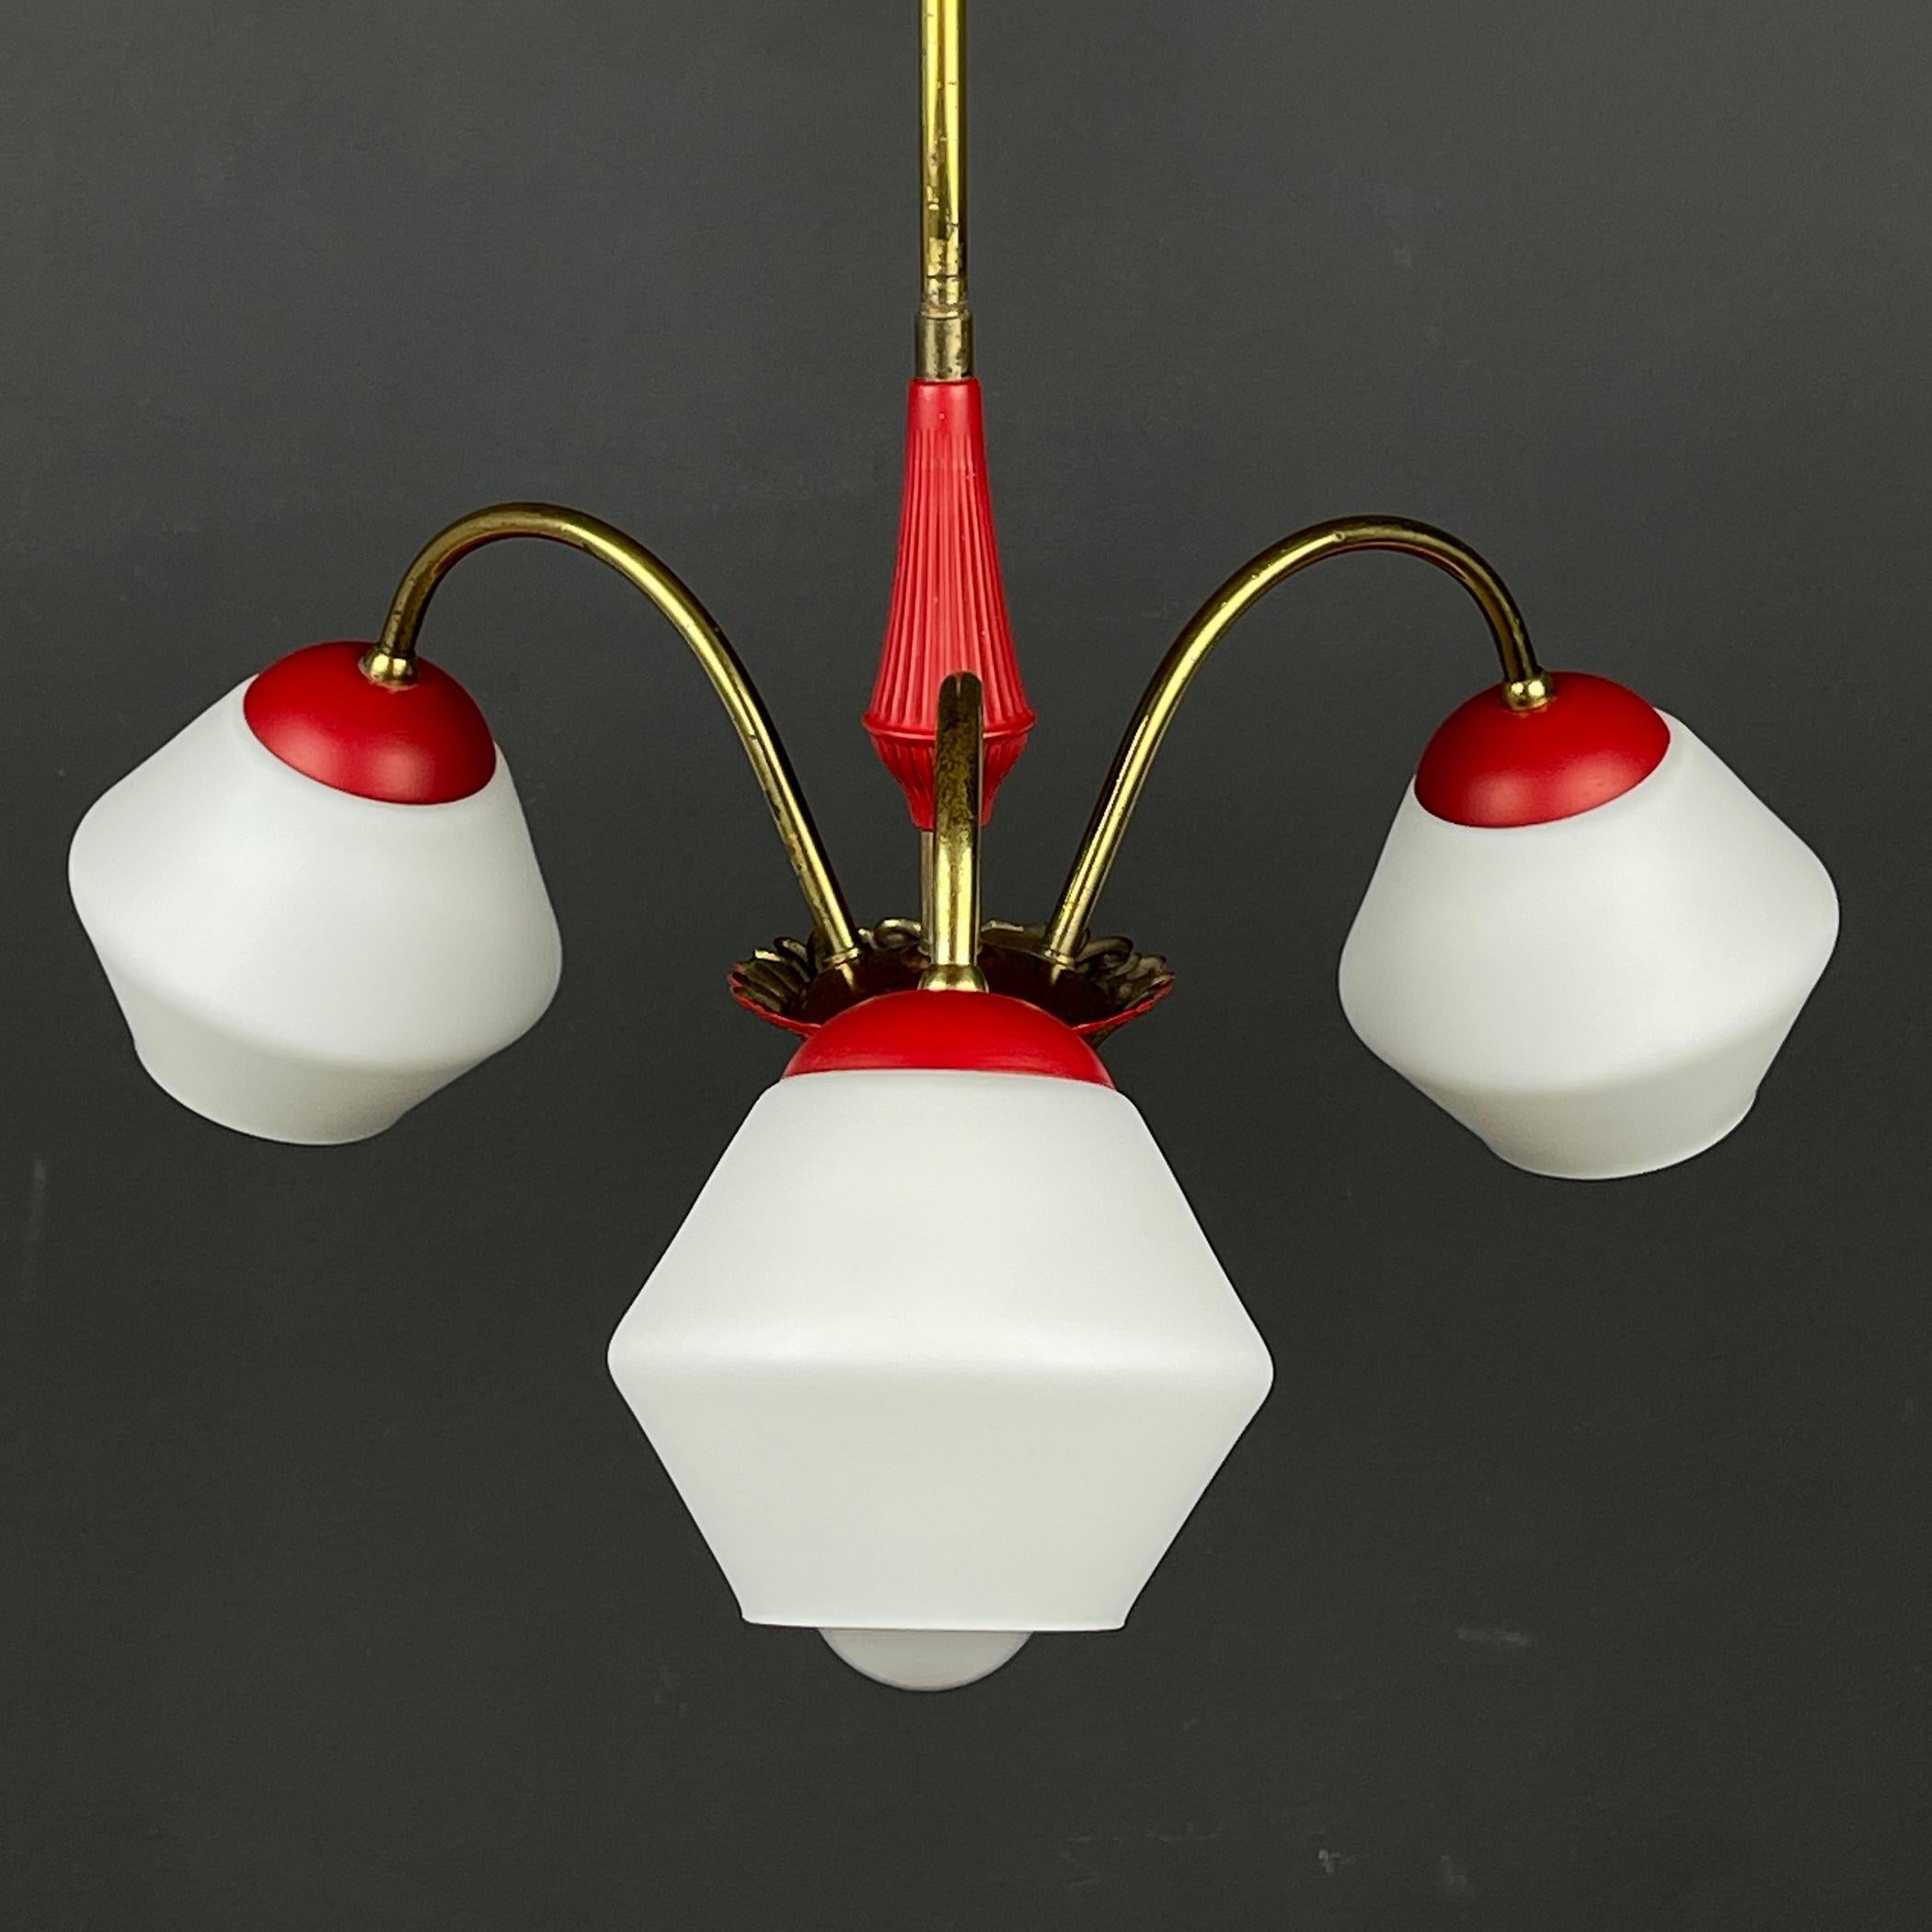 Add a touch of timeless elegance to your space with this stunning vintage 3-arm chandelier. Crafted in Italy during the late 1950s, this piece showcases the epitome of Italian design from the mid-century era. The chandelier features a sturdy frame